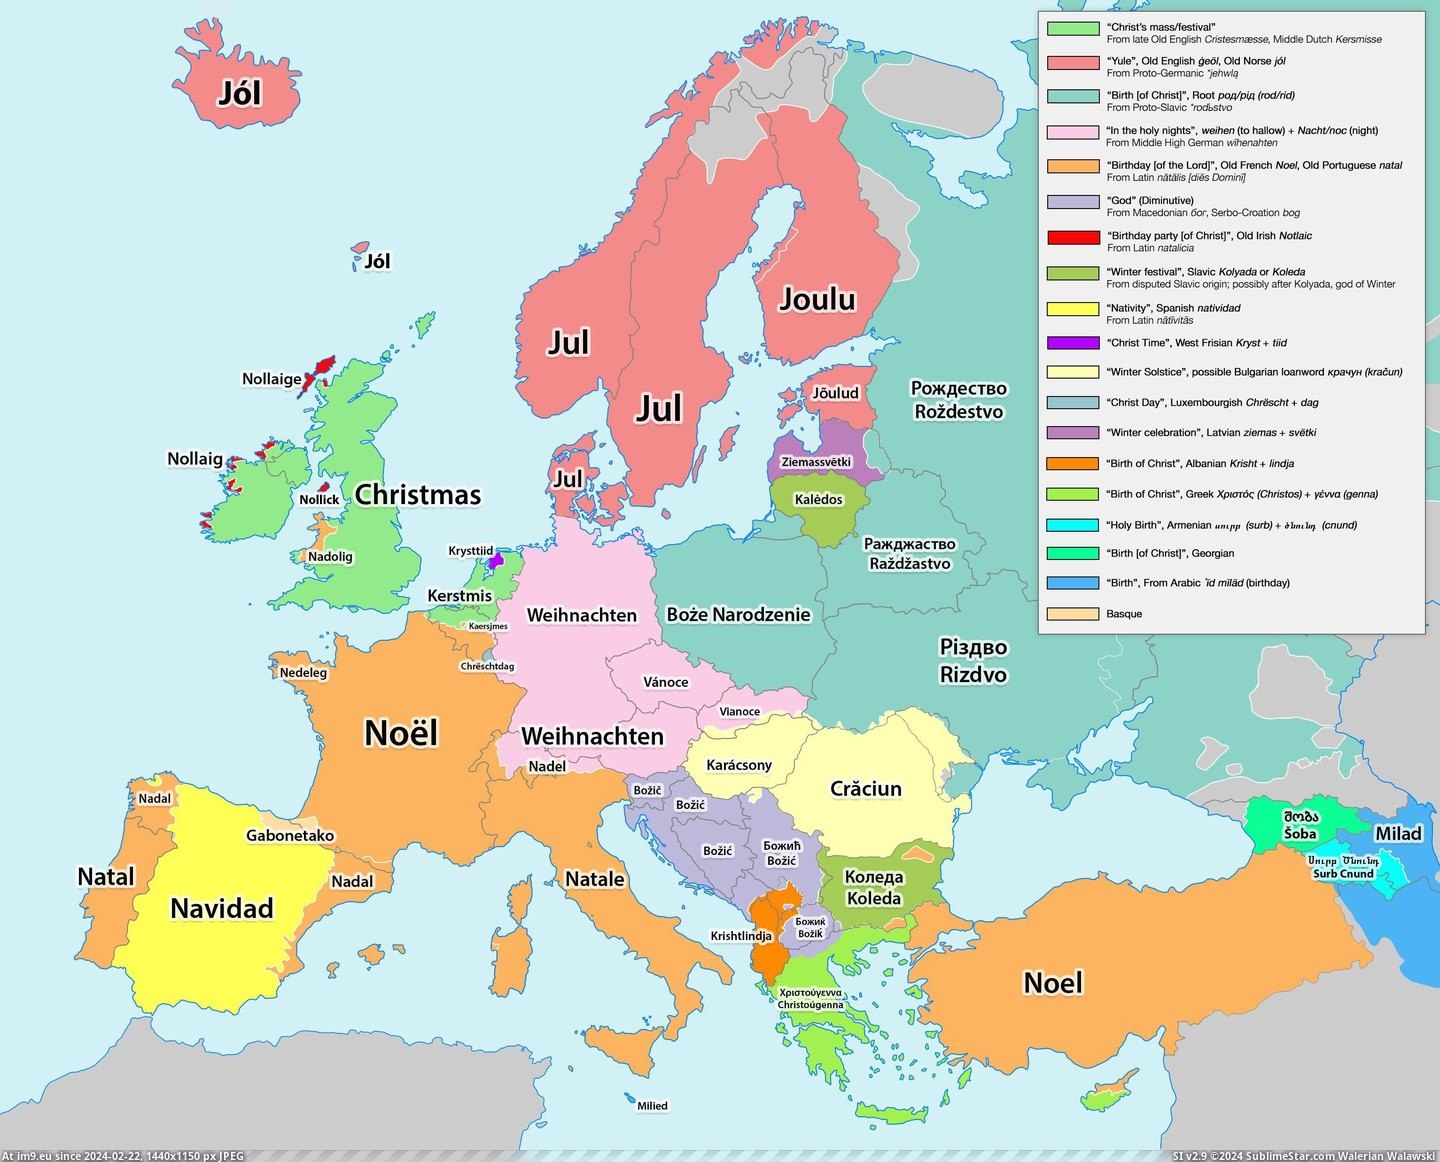 #Europe #Christmas #Translations #Holidays #Etymologies [Mapporn] Where does Christmas come from? Translations and etymologies of holidays in Europe [3065x2460] Pic. (Bild von album My r/MAPS favs))